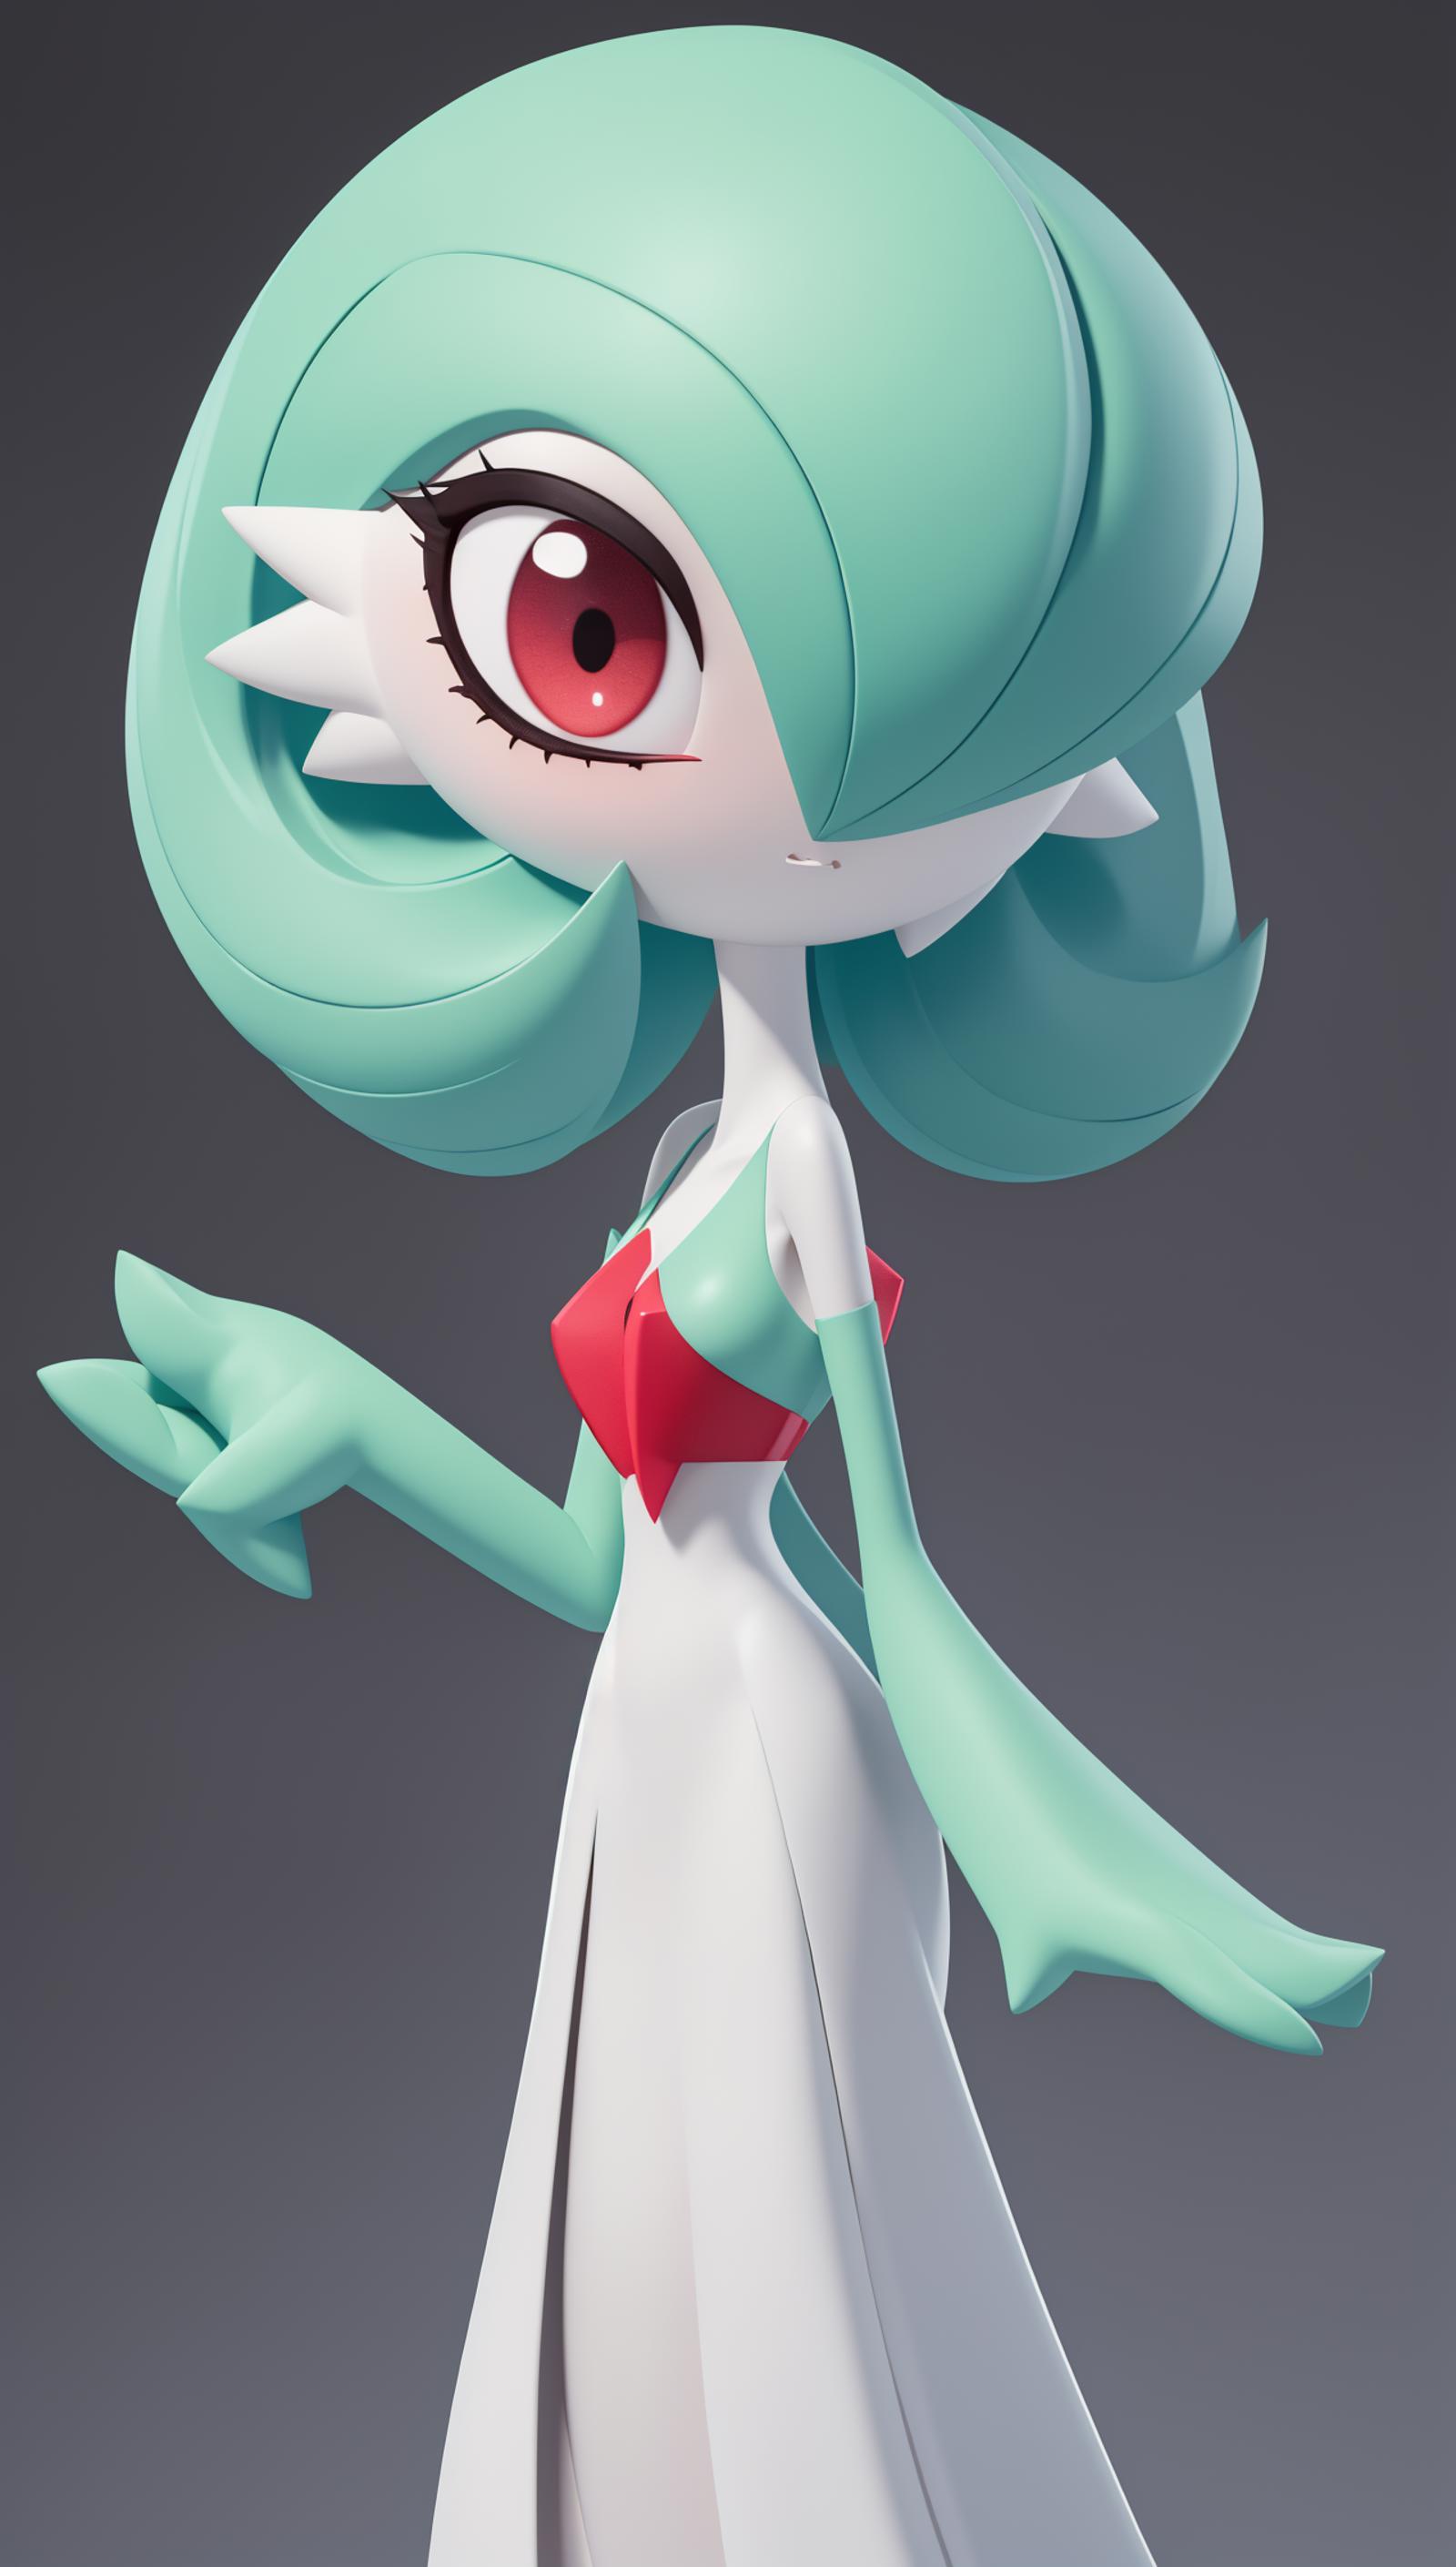 A 3D model of a female character with a short haircut and green hair.